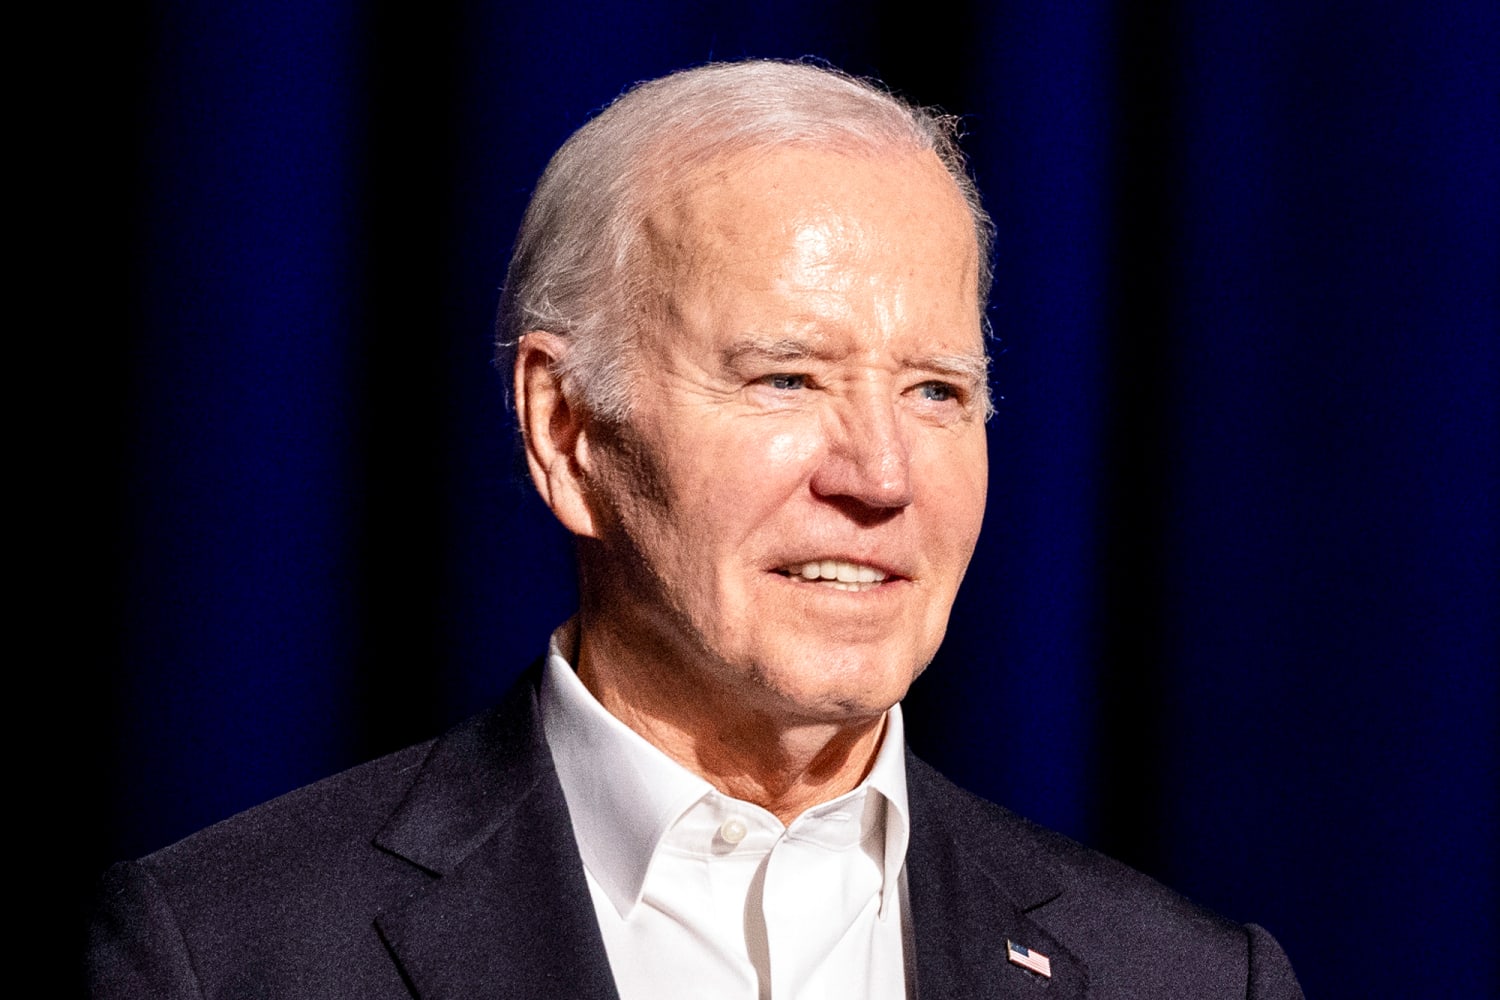 Biden announced a new policy to protect undocumented spouses of US